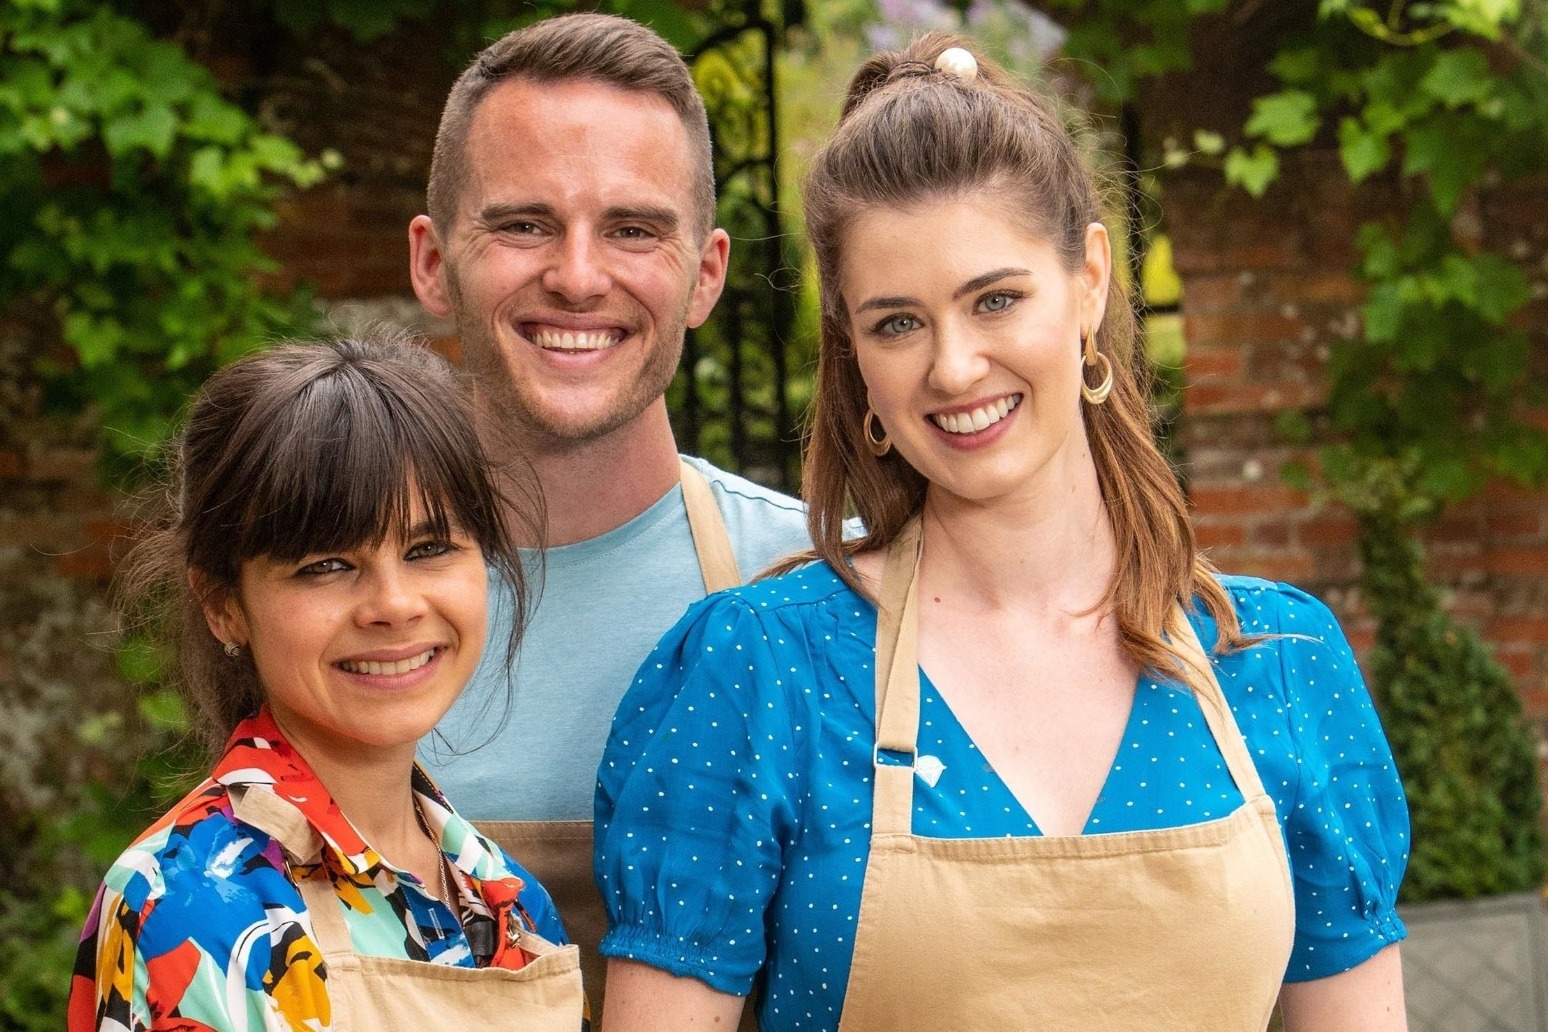 WINNER OF THE GREAT BRITISH BAKE OFF CROWNED AFTER TEARFUL FINAL 